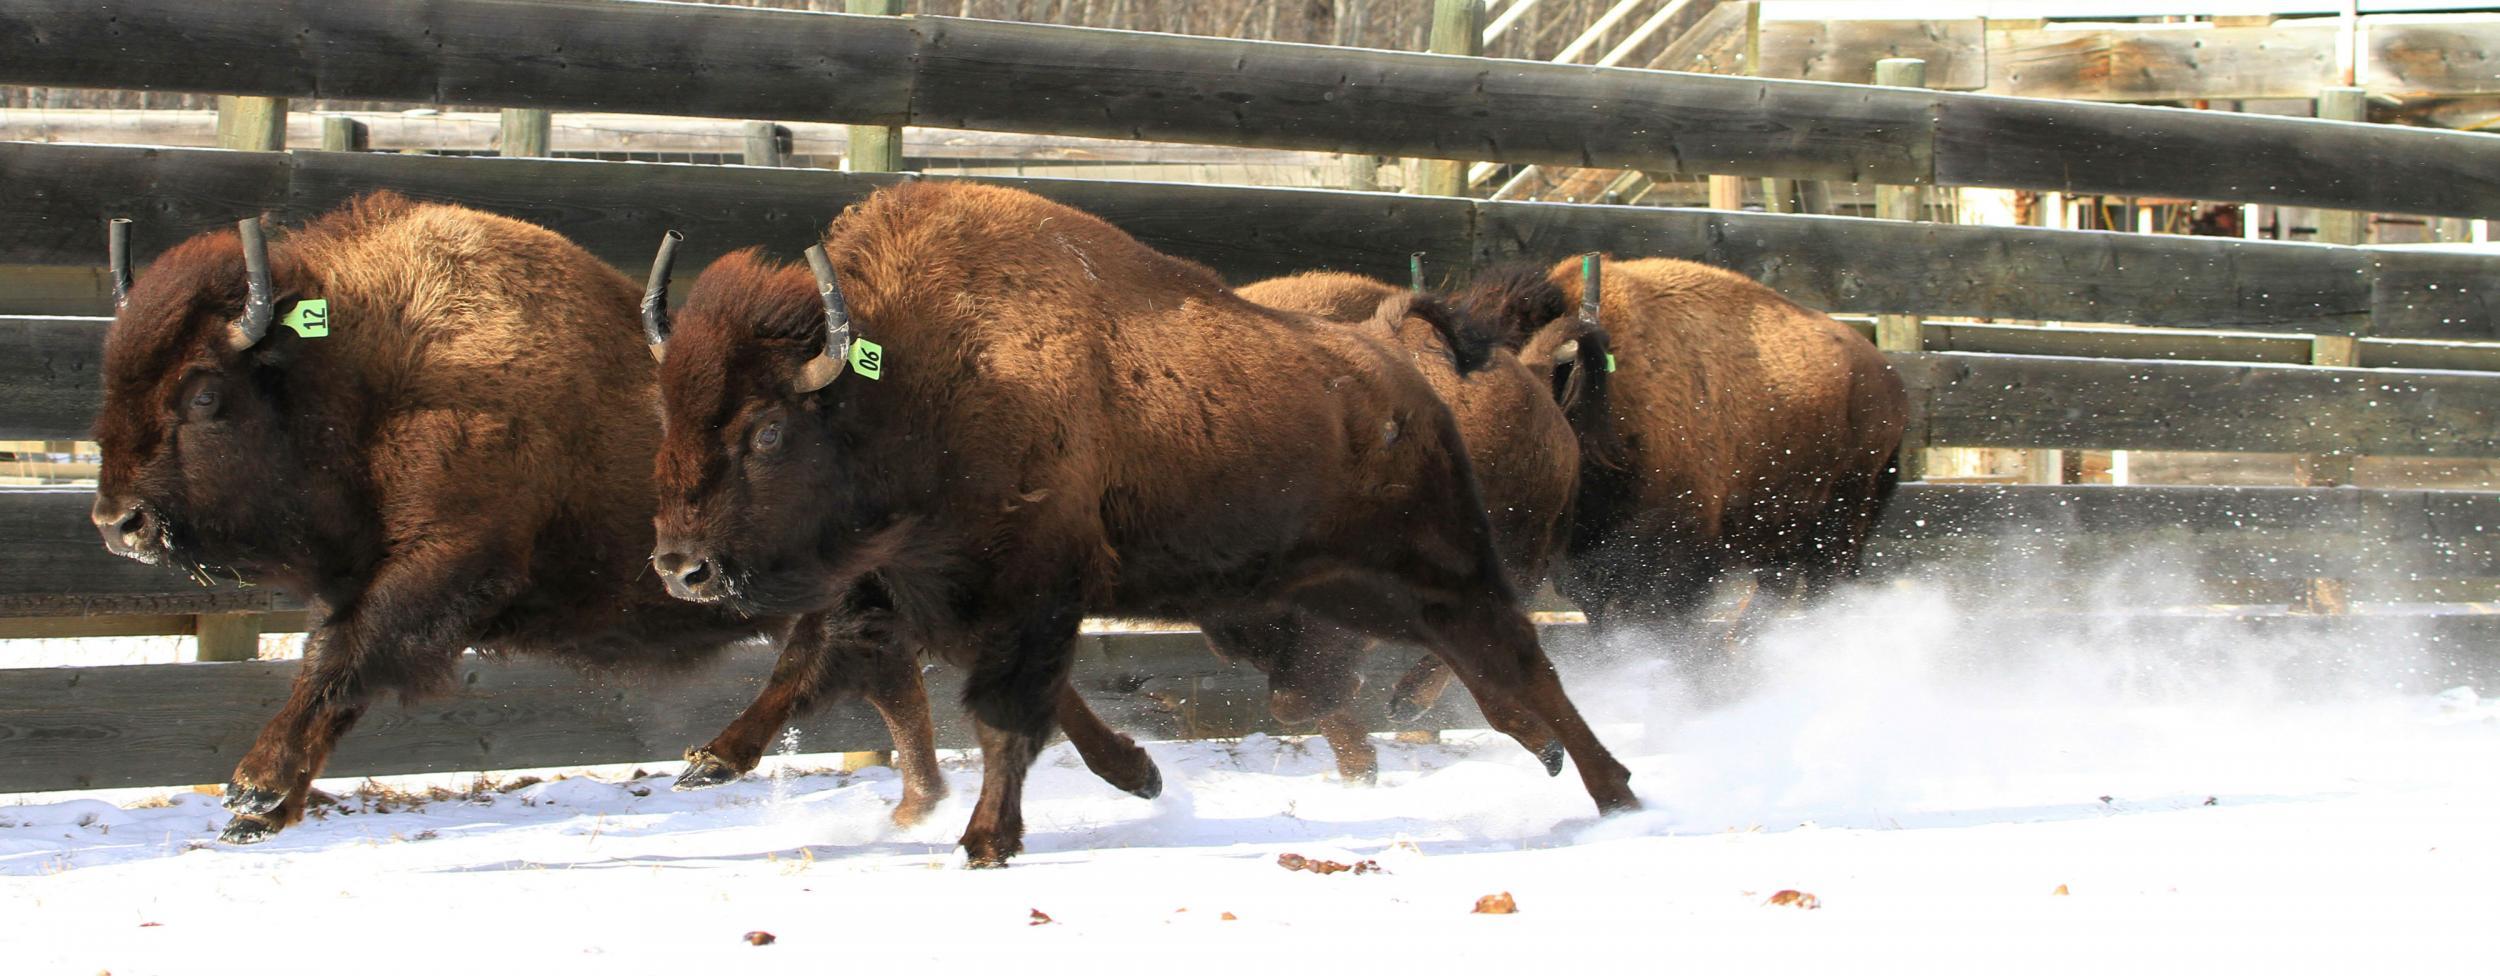 Wild bison roam Canada's oldest national park for first time in more ...